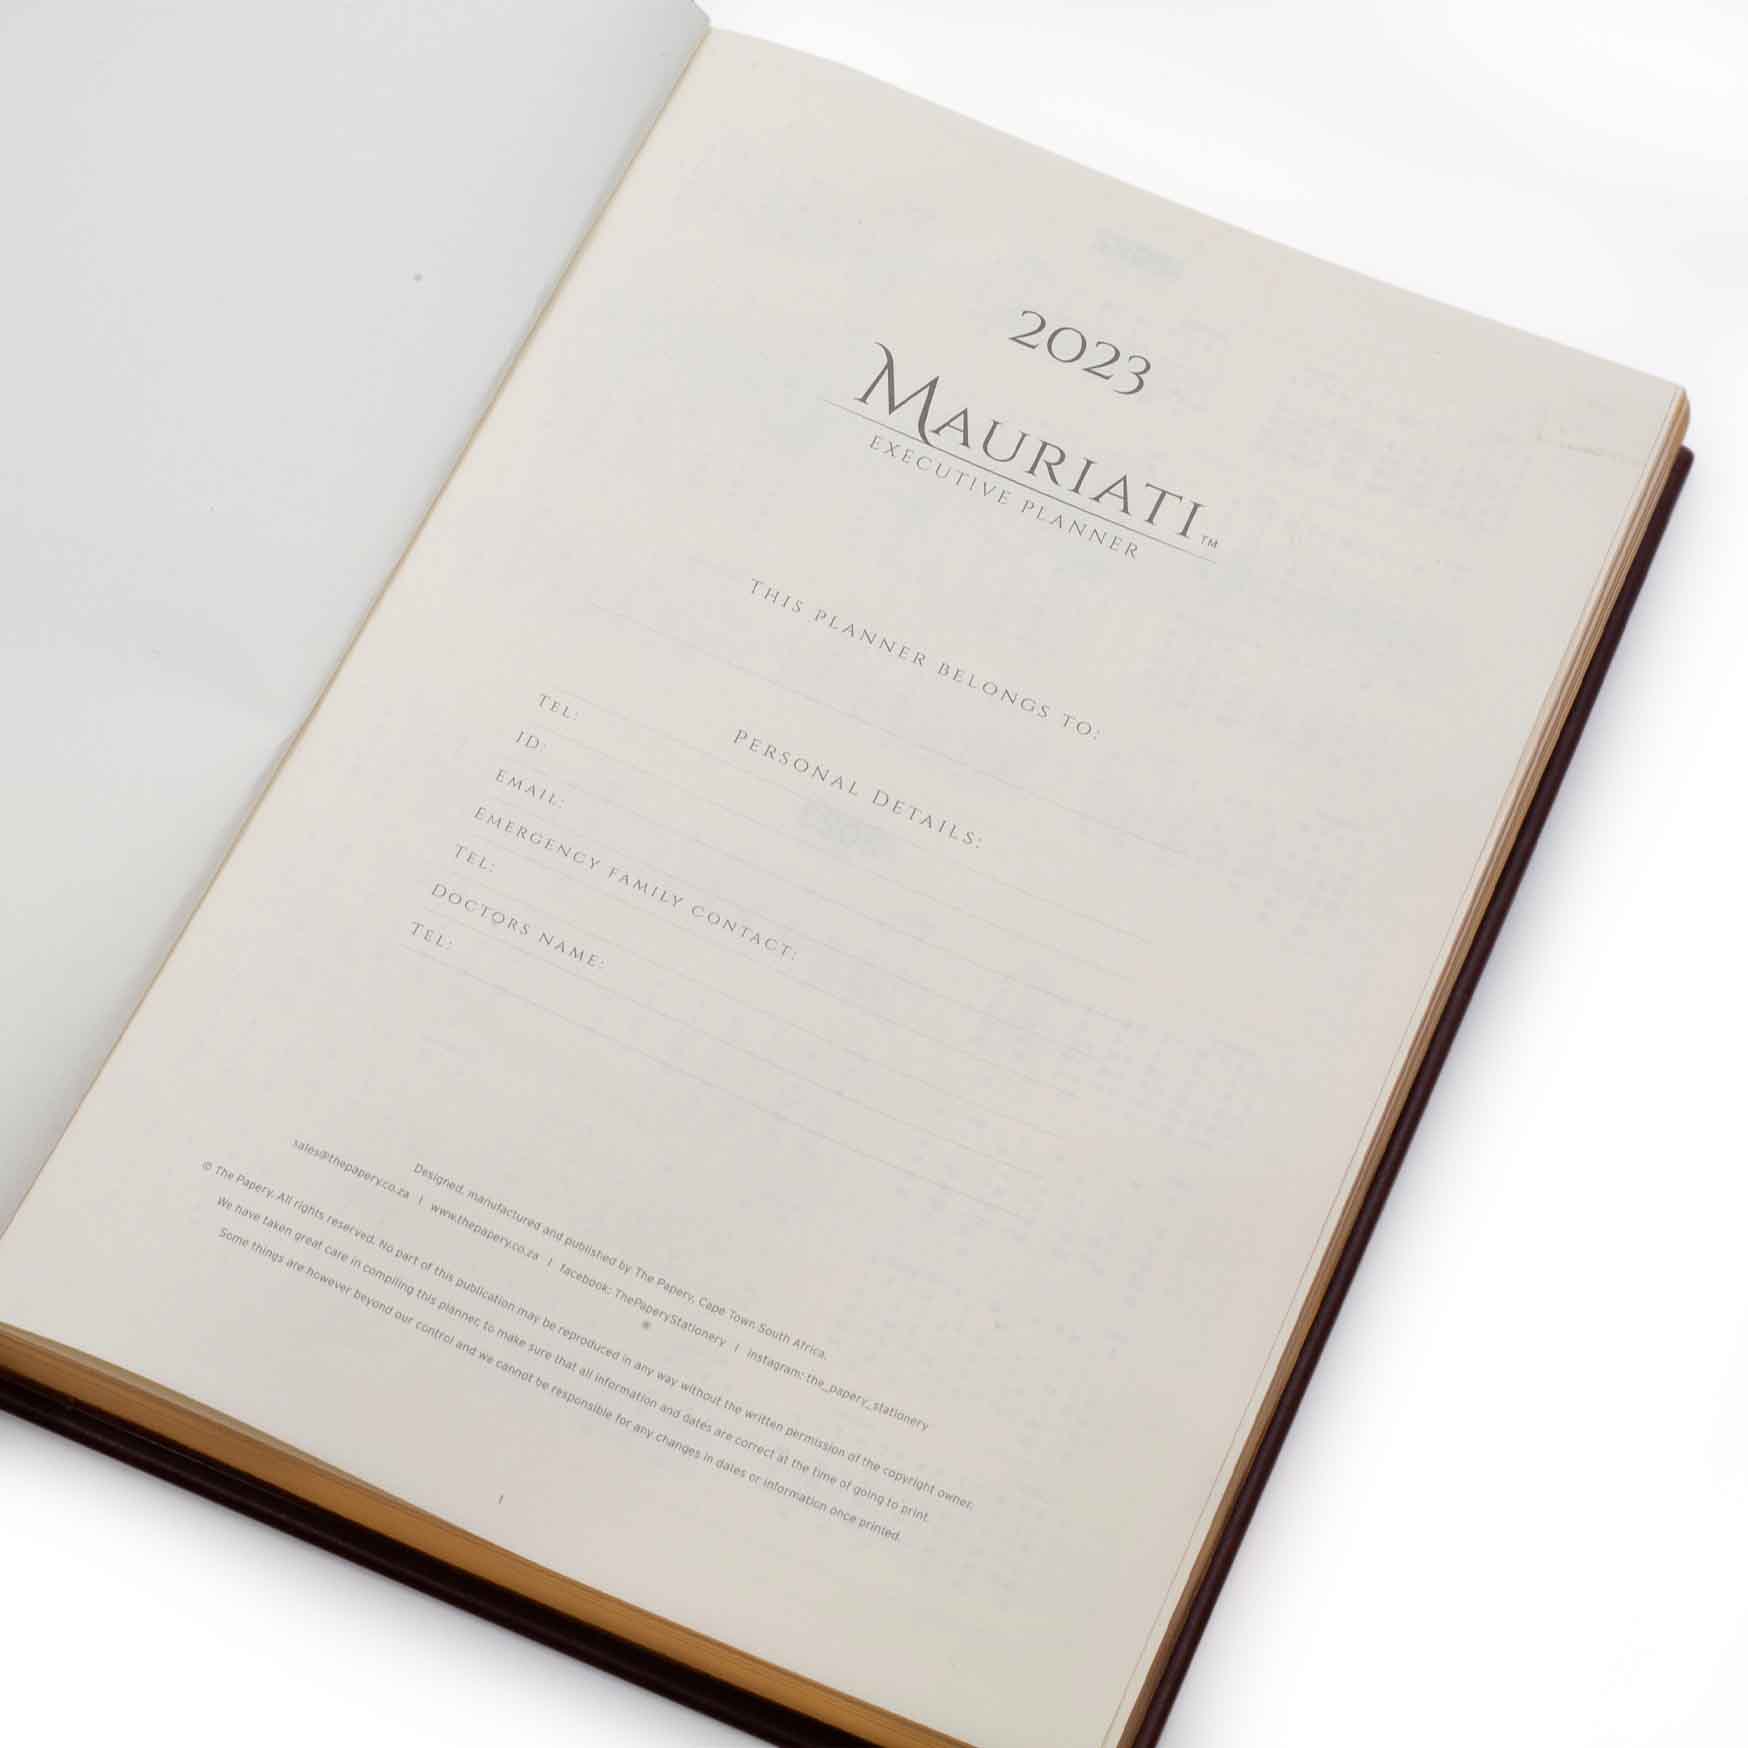 Image shows the first page of the Rustik Mauriati Planner